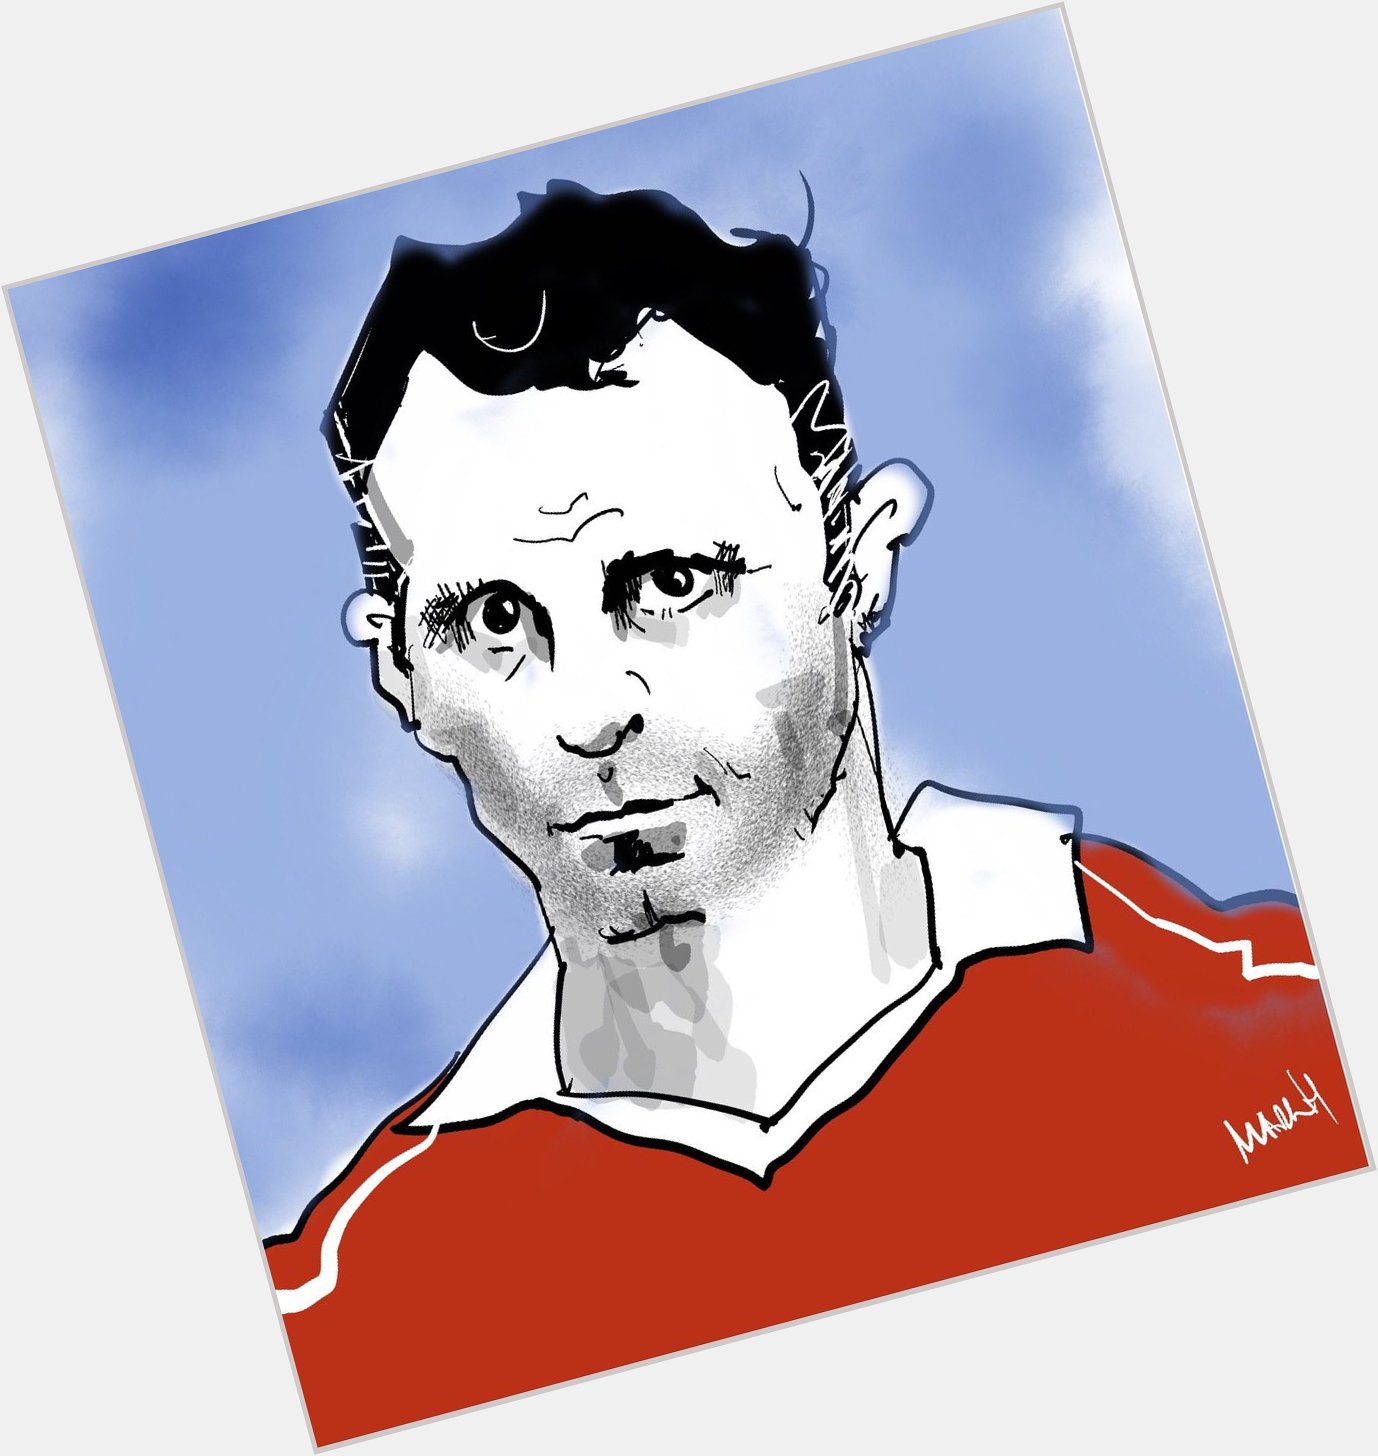 Possibly a happy birthday (but a bit of a long shot) Welshman Ryan Giggs. 